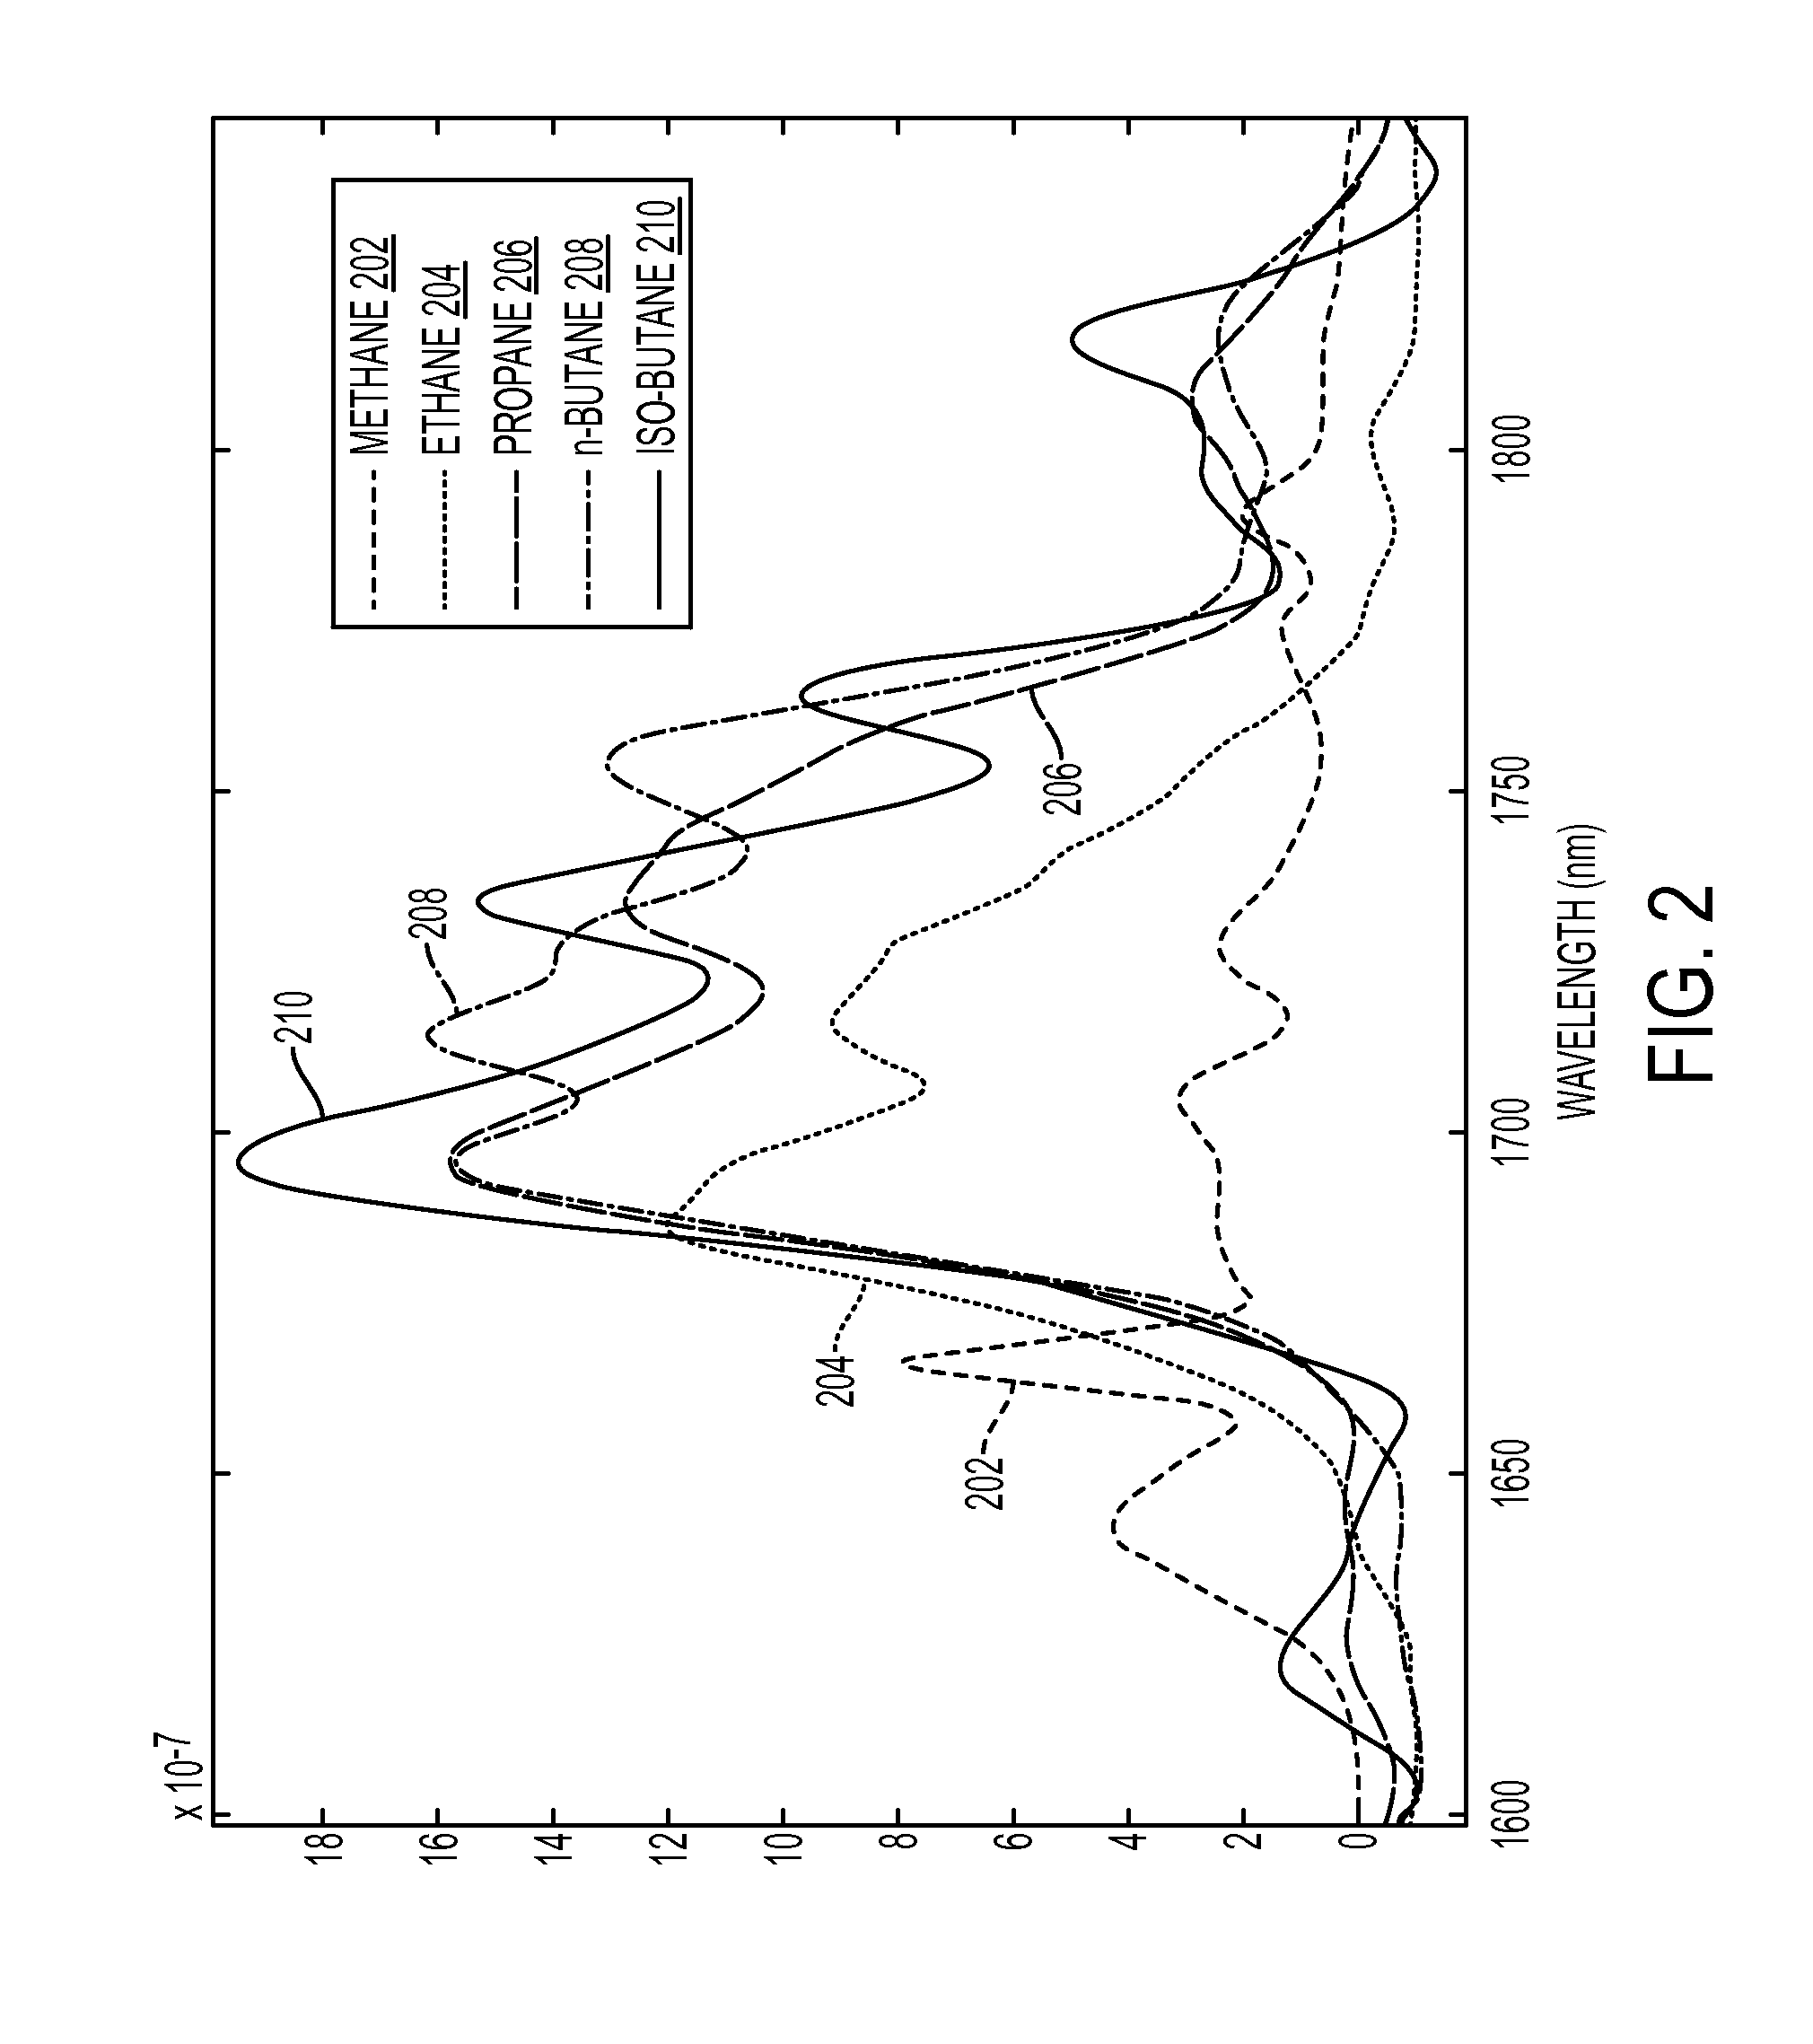 Systems, methods, and apparatus for optical hydrocarbon gas composition monitoring